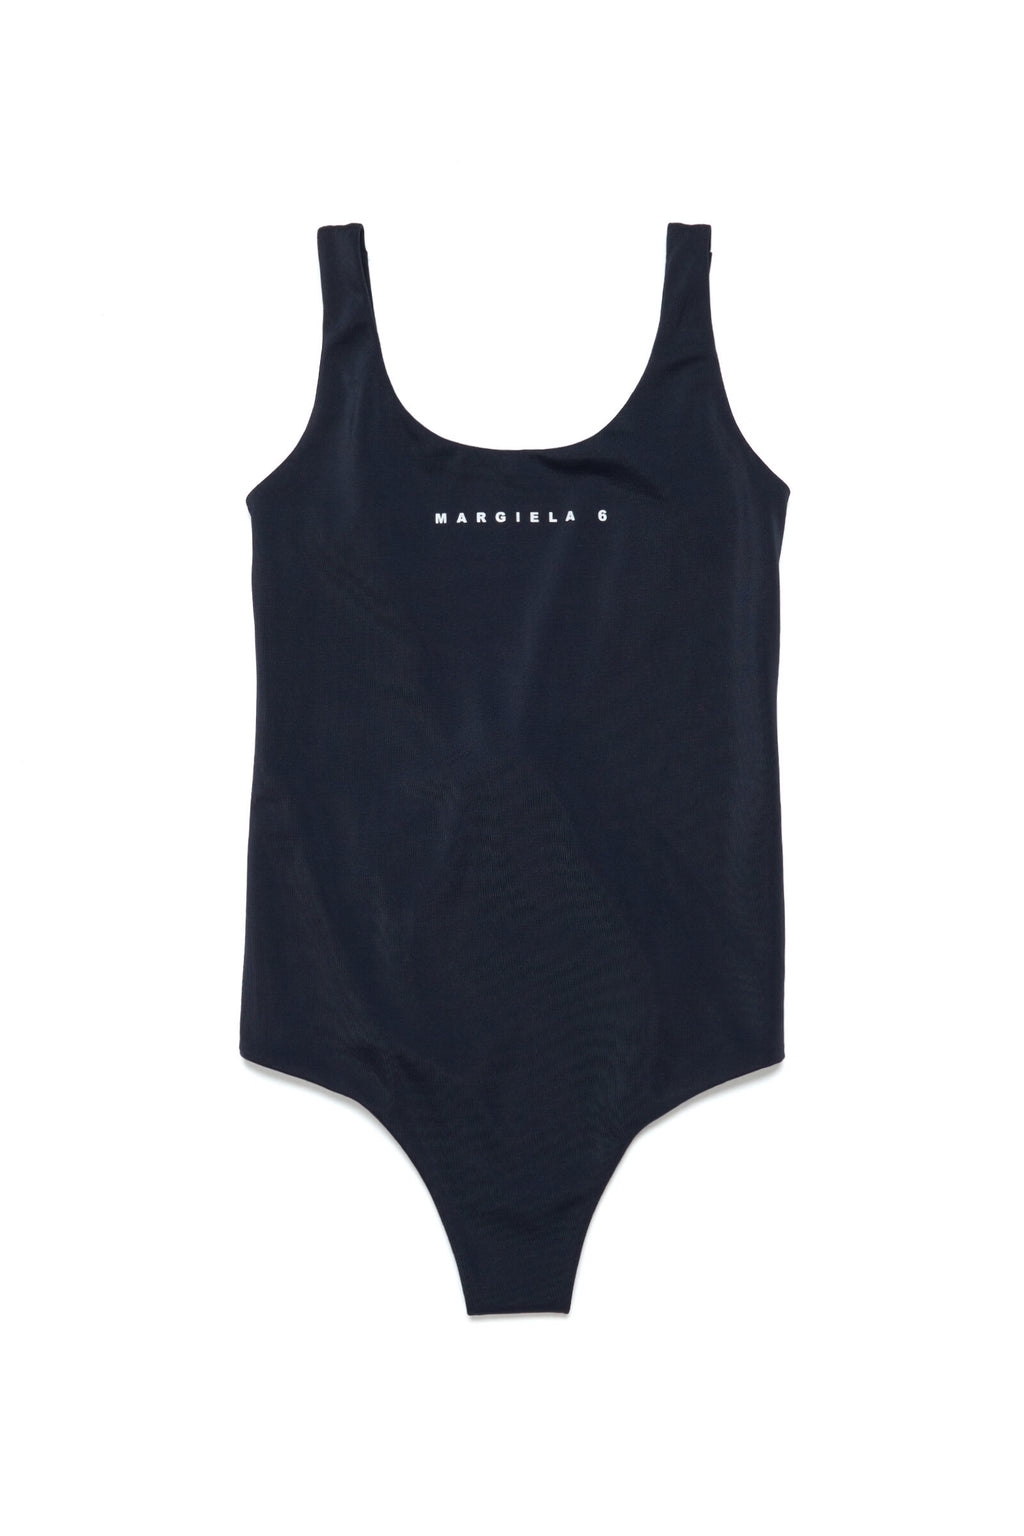 Sporty black one-piece swimming costume with minimal logo